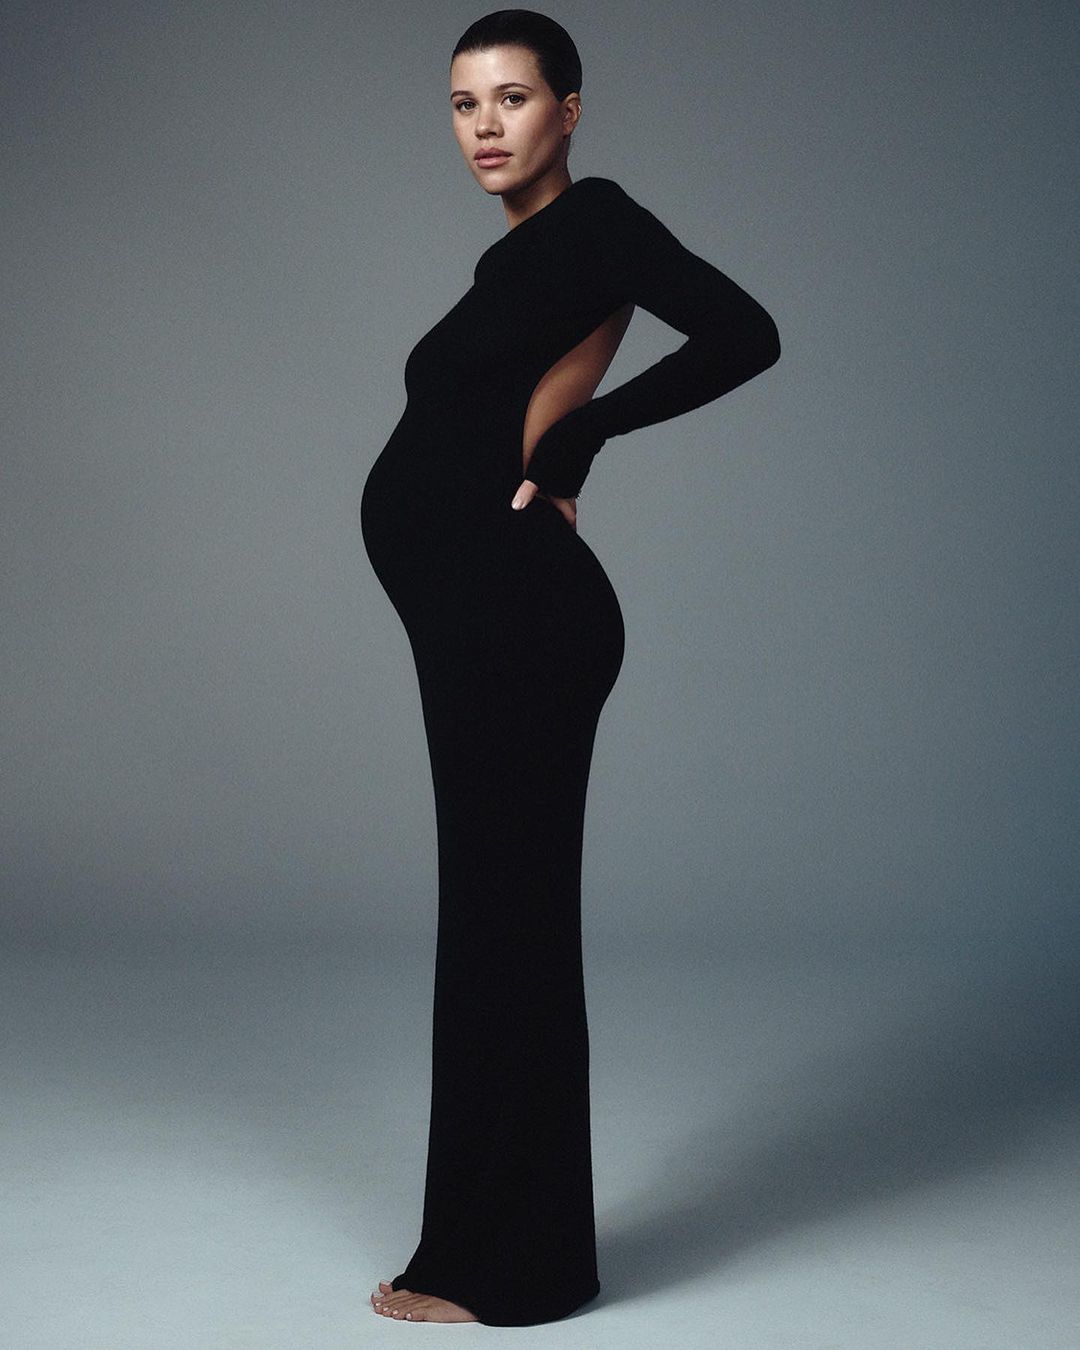 ofia Richie Grainge's baby bump shoot from an Instagram post dated January 25, 2024 | Source: Instagram/voguemagazine/